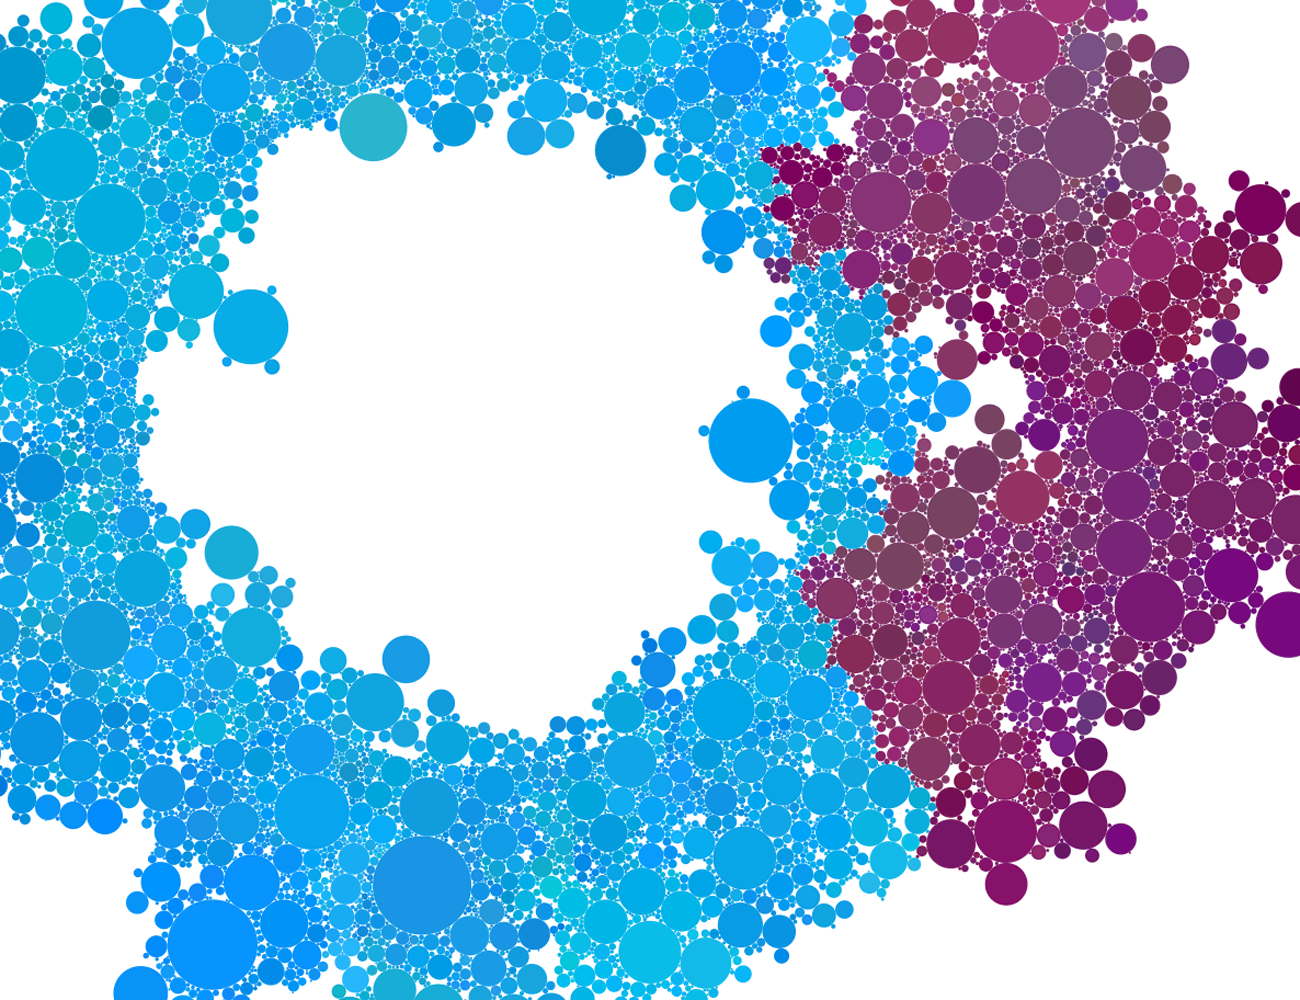 Cell Cluster 2 – Blue and Purple